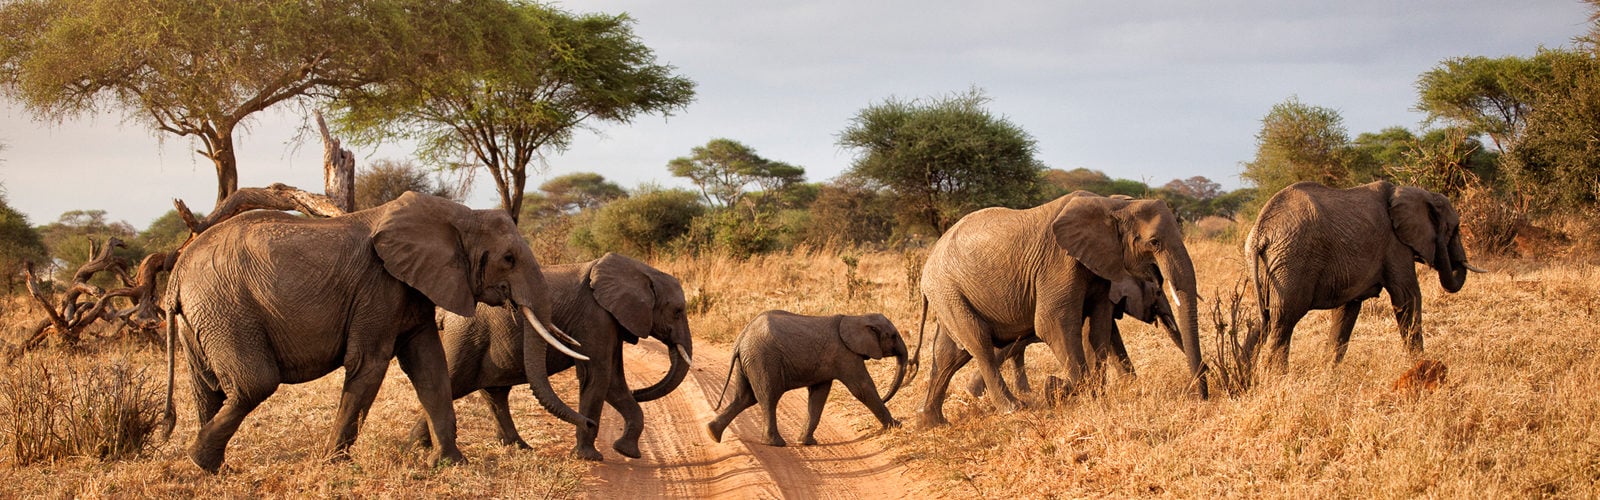 A family of elephants in Madikwe